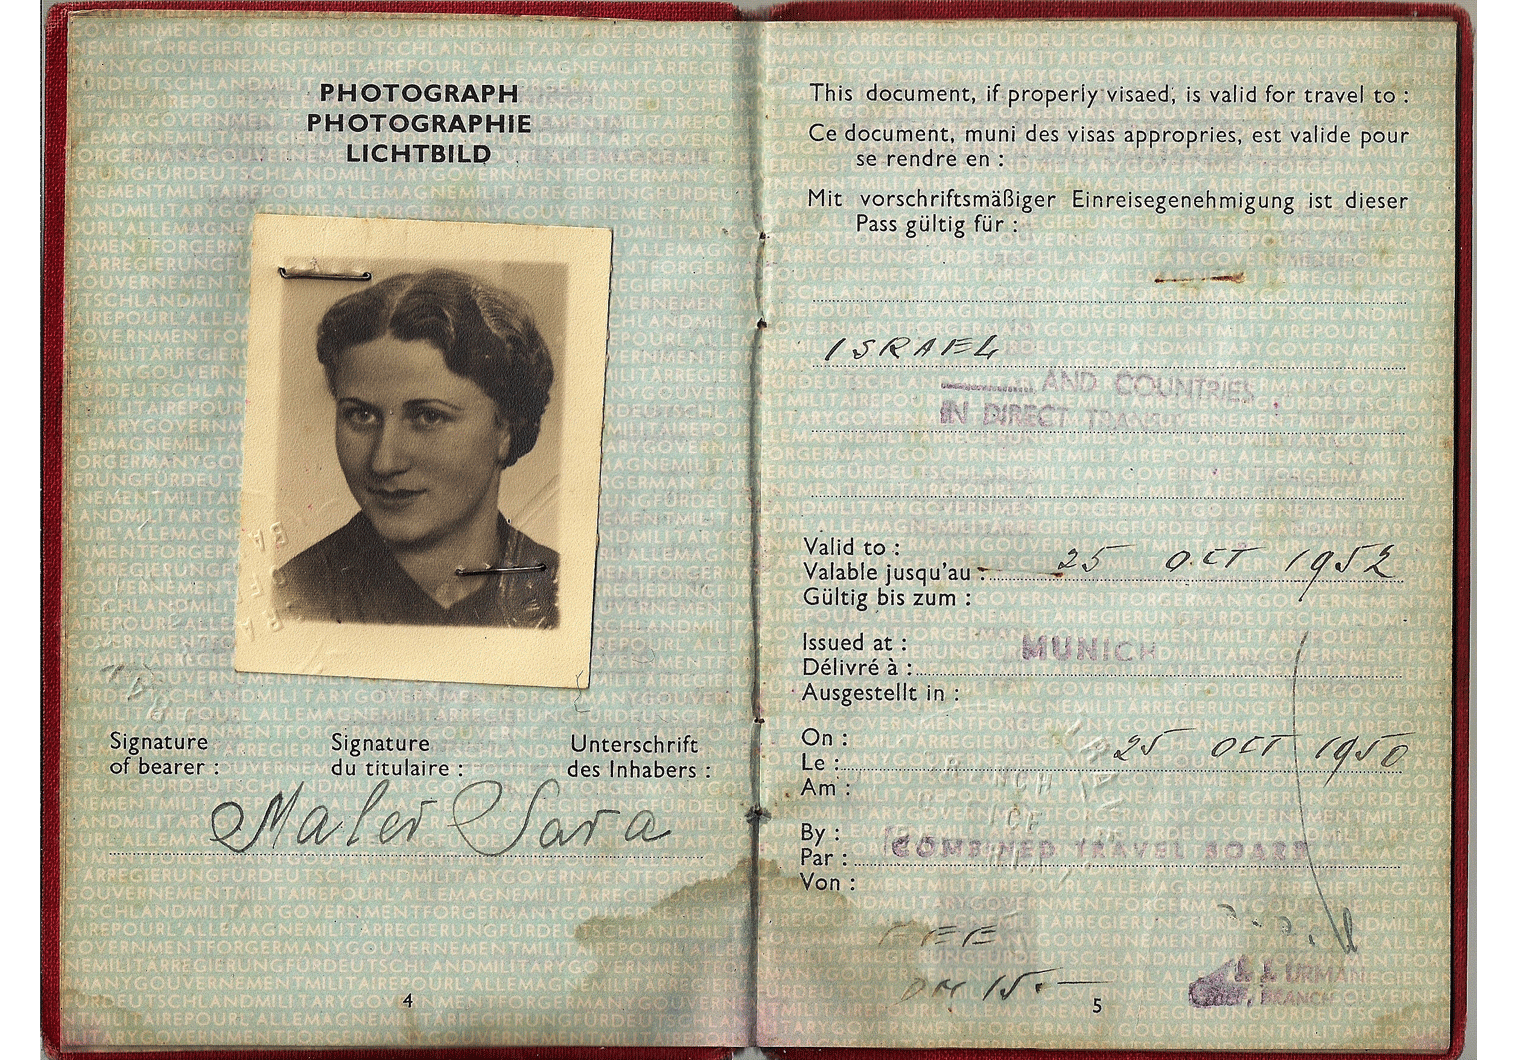 Allied Military Government passport